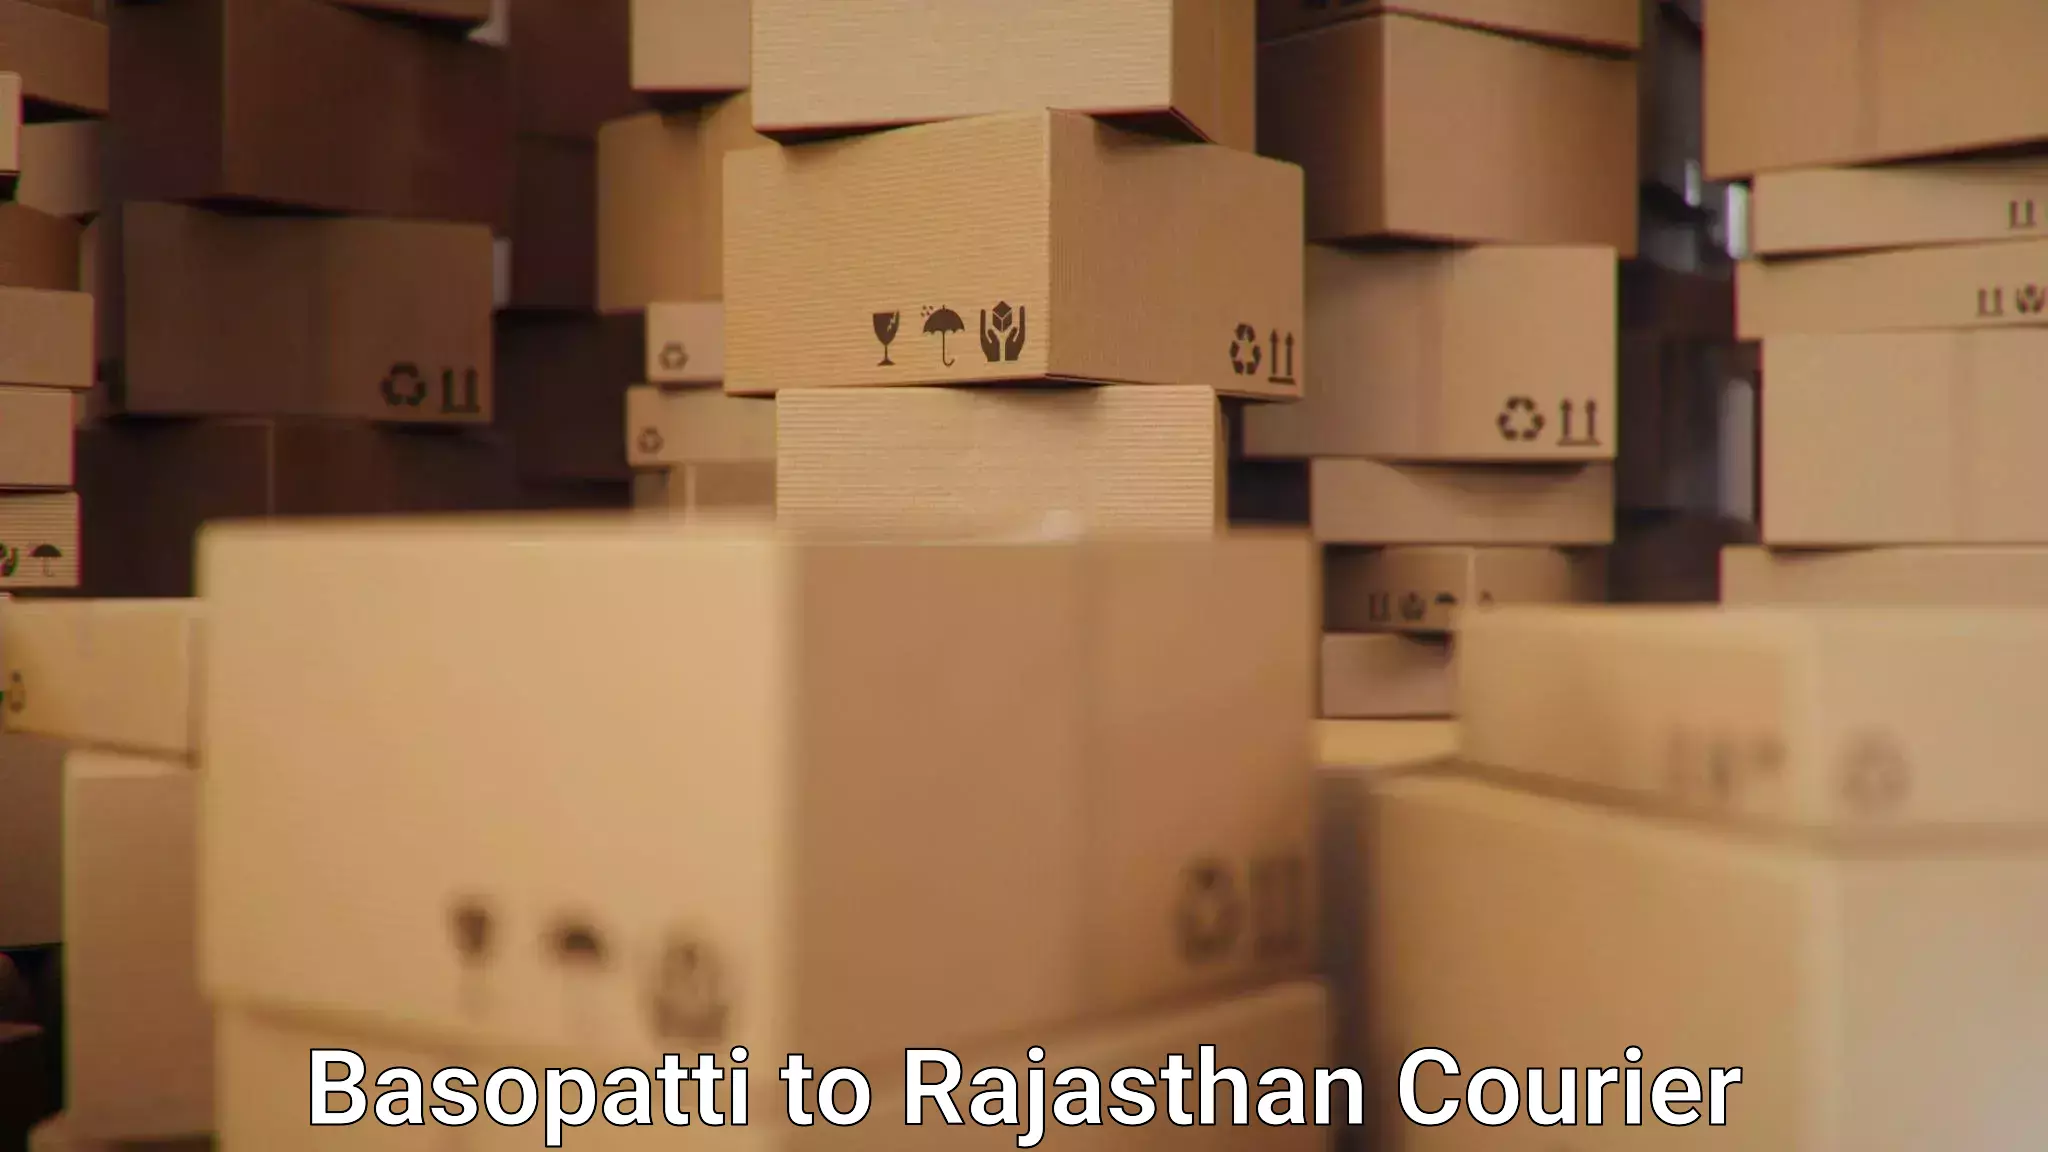 Easy access courier services Basopatti to Rajgarh Rajasthan